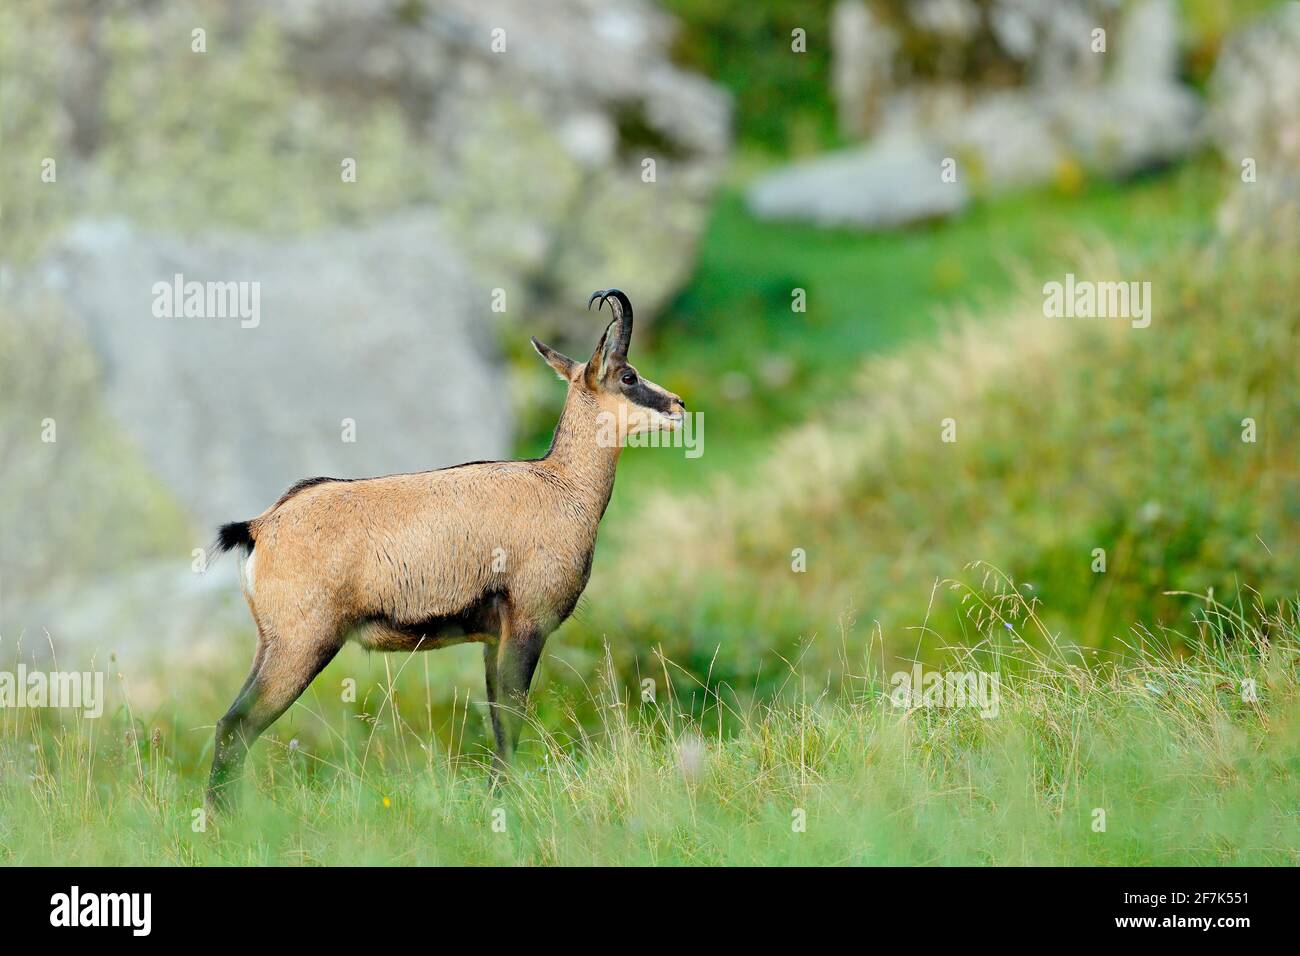 Chamois, Rupicapra rupicapra, in the green grass, grey rock in background, Gran Paradiso, Italy. Horned animal in the Alp. Wildlife scene from nature. Stock Photo